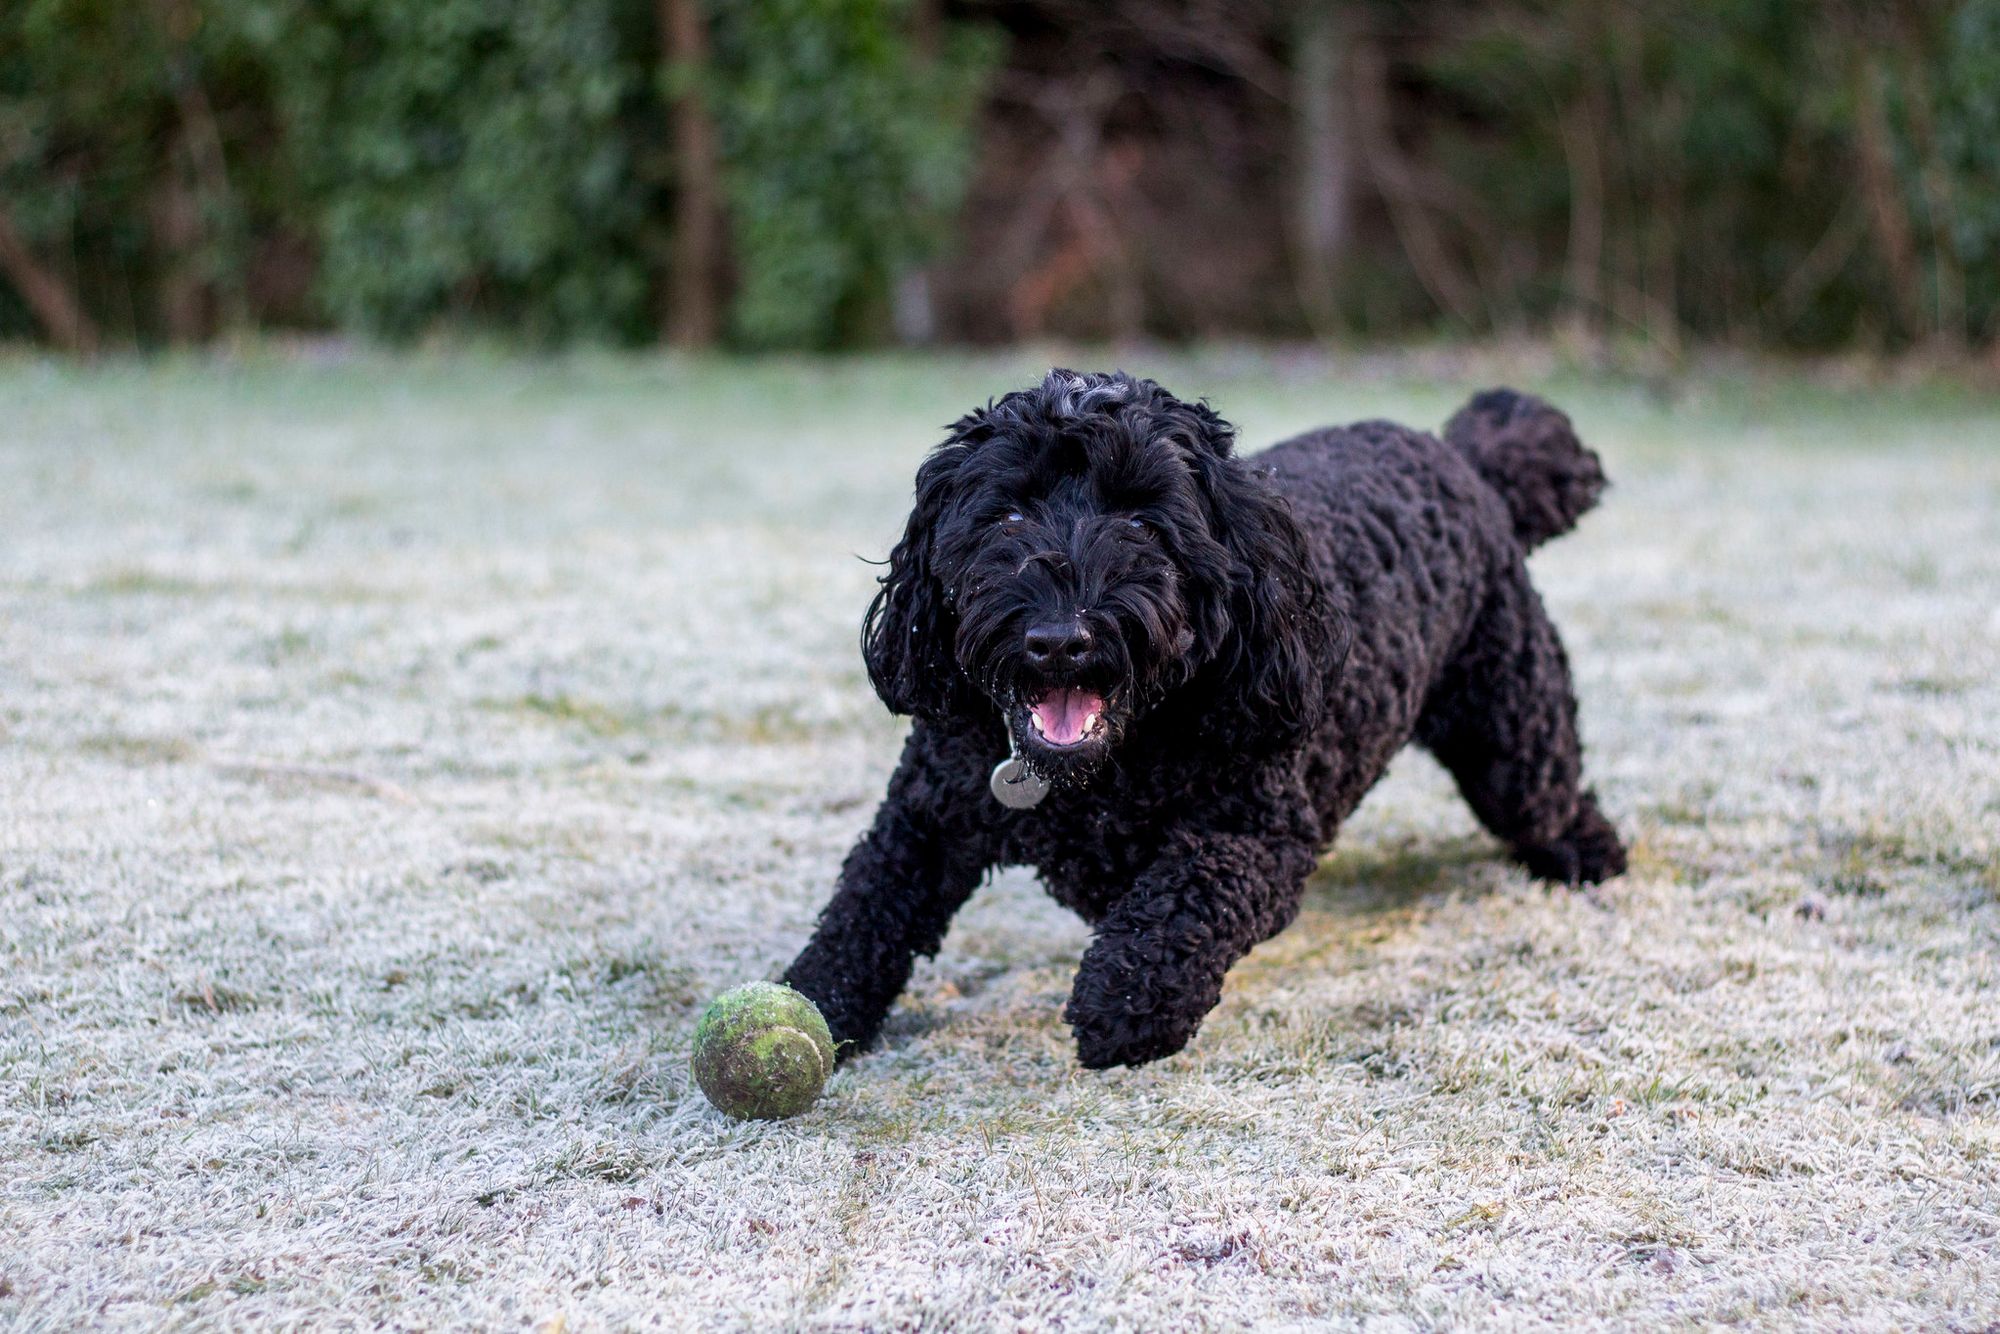 Black Cockapoo playing with ball